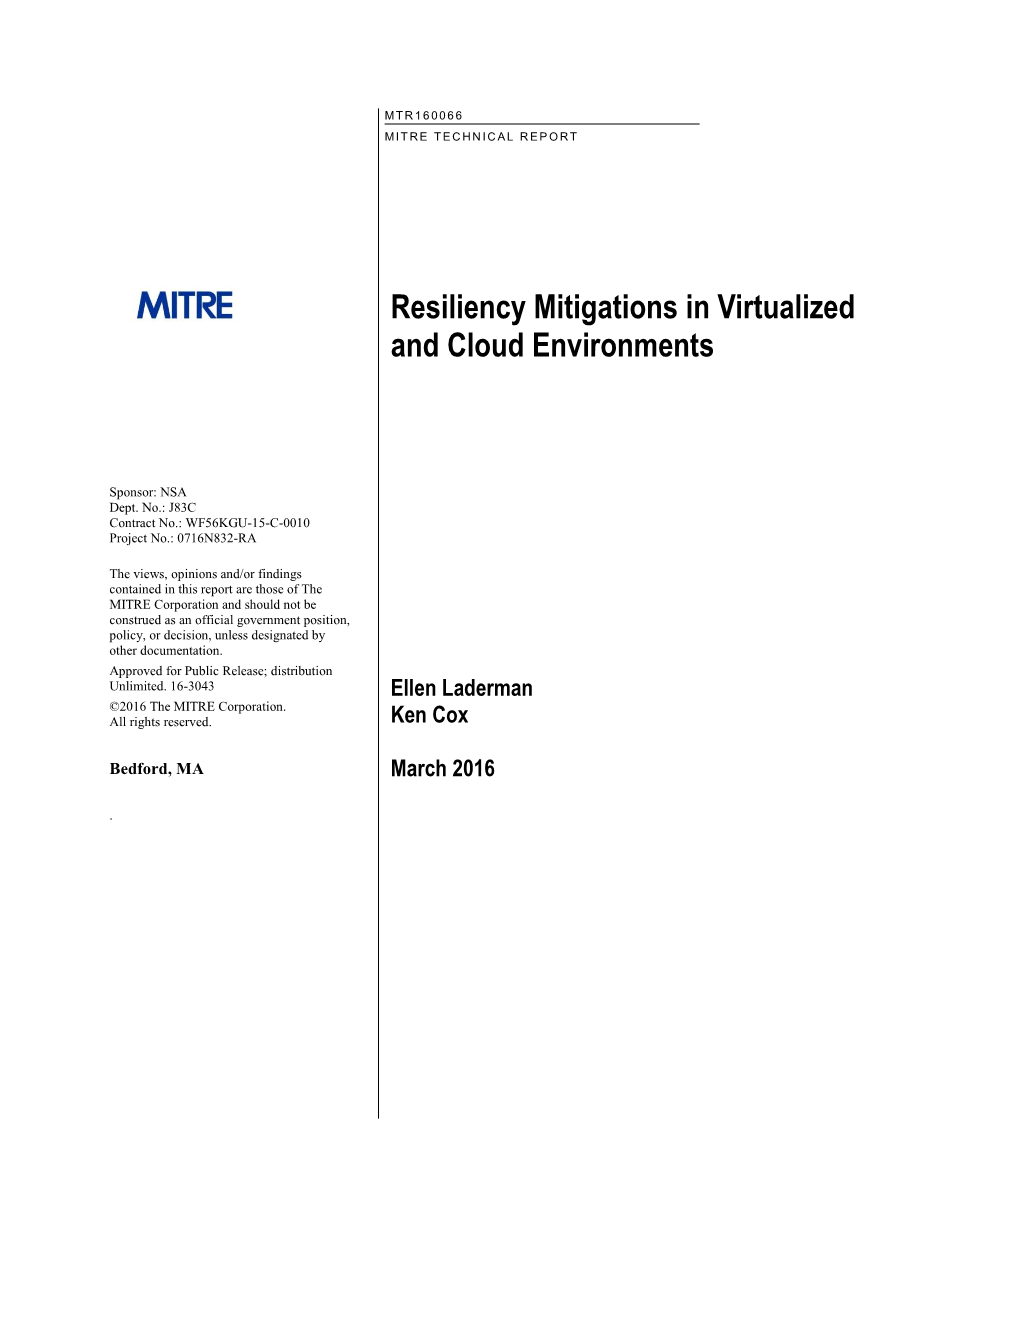 Resiliency Mitigations in Virtualized and Cloud Environment